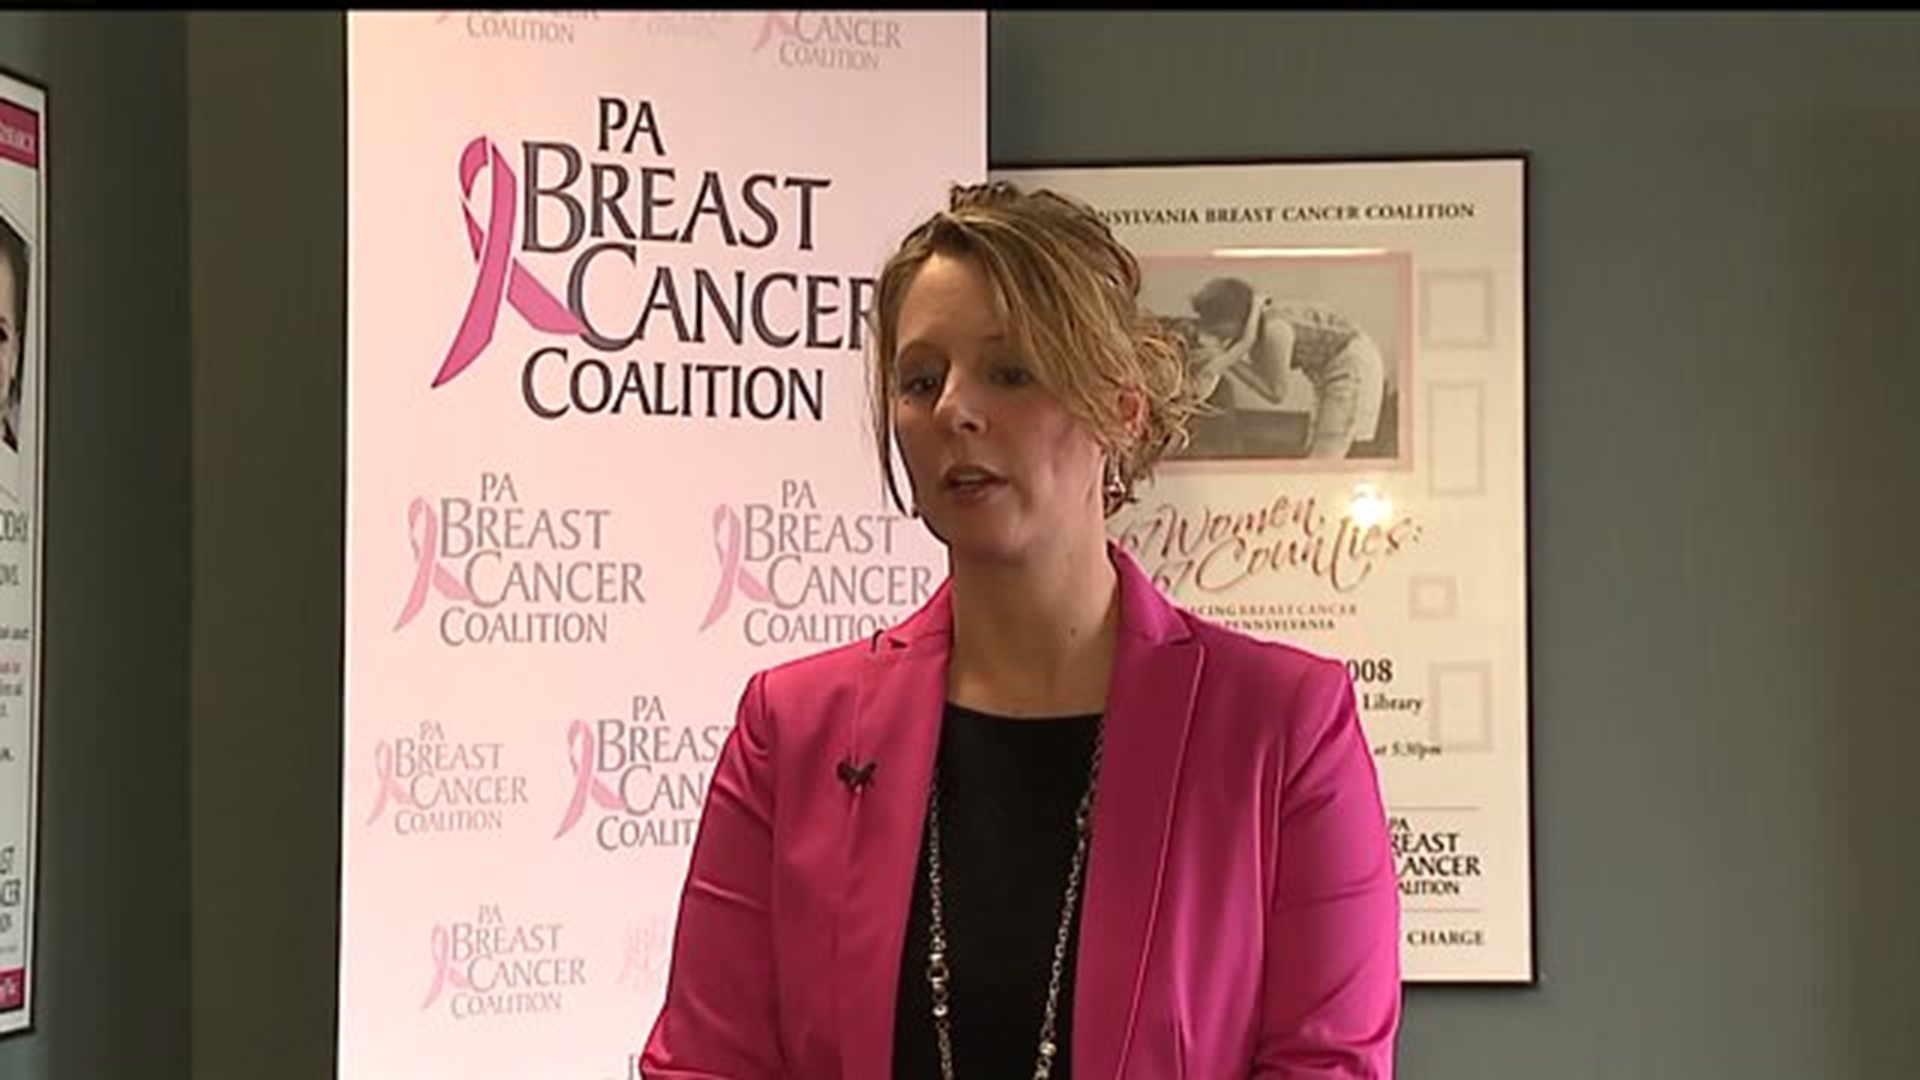 Pennsylvania Breast Cancer Coalition opposes mammography recent guidelines